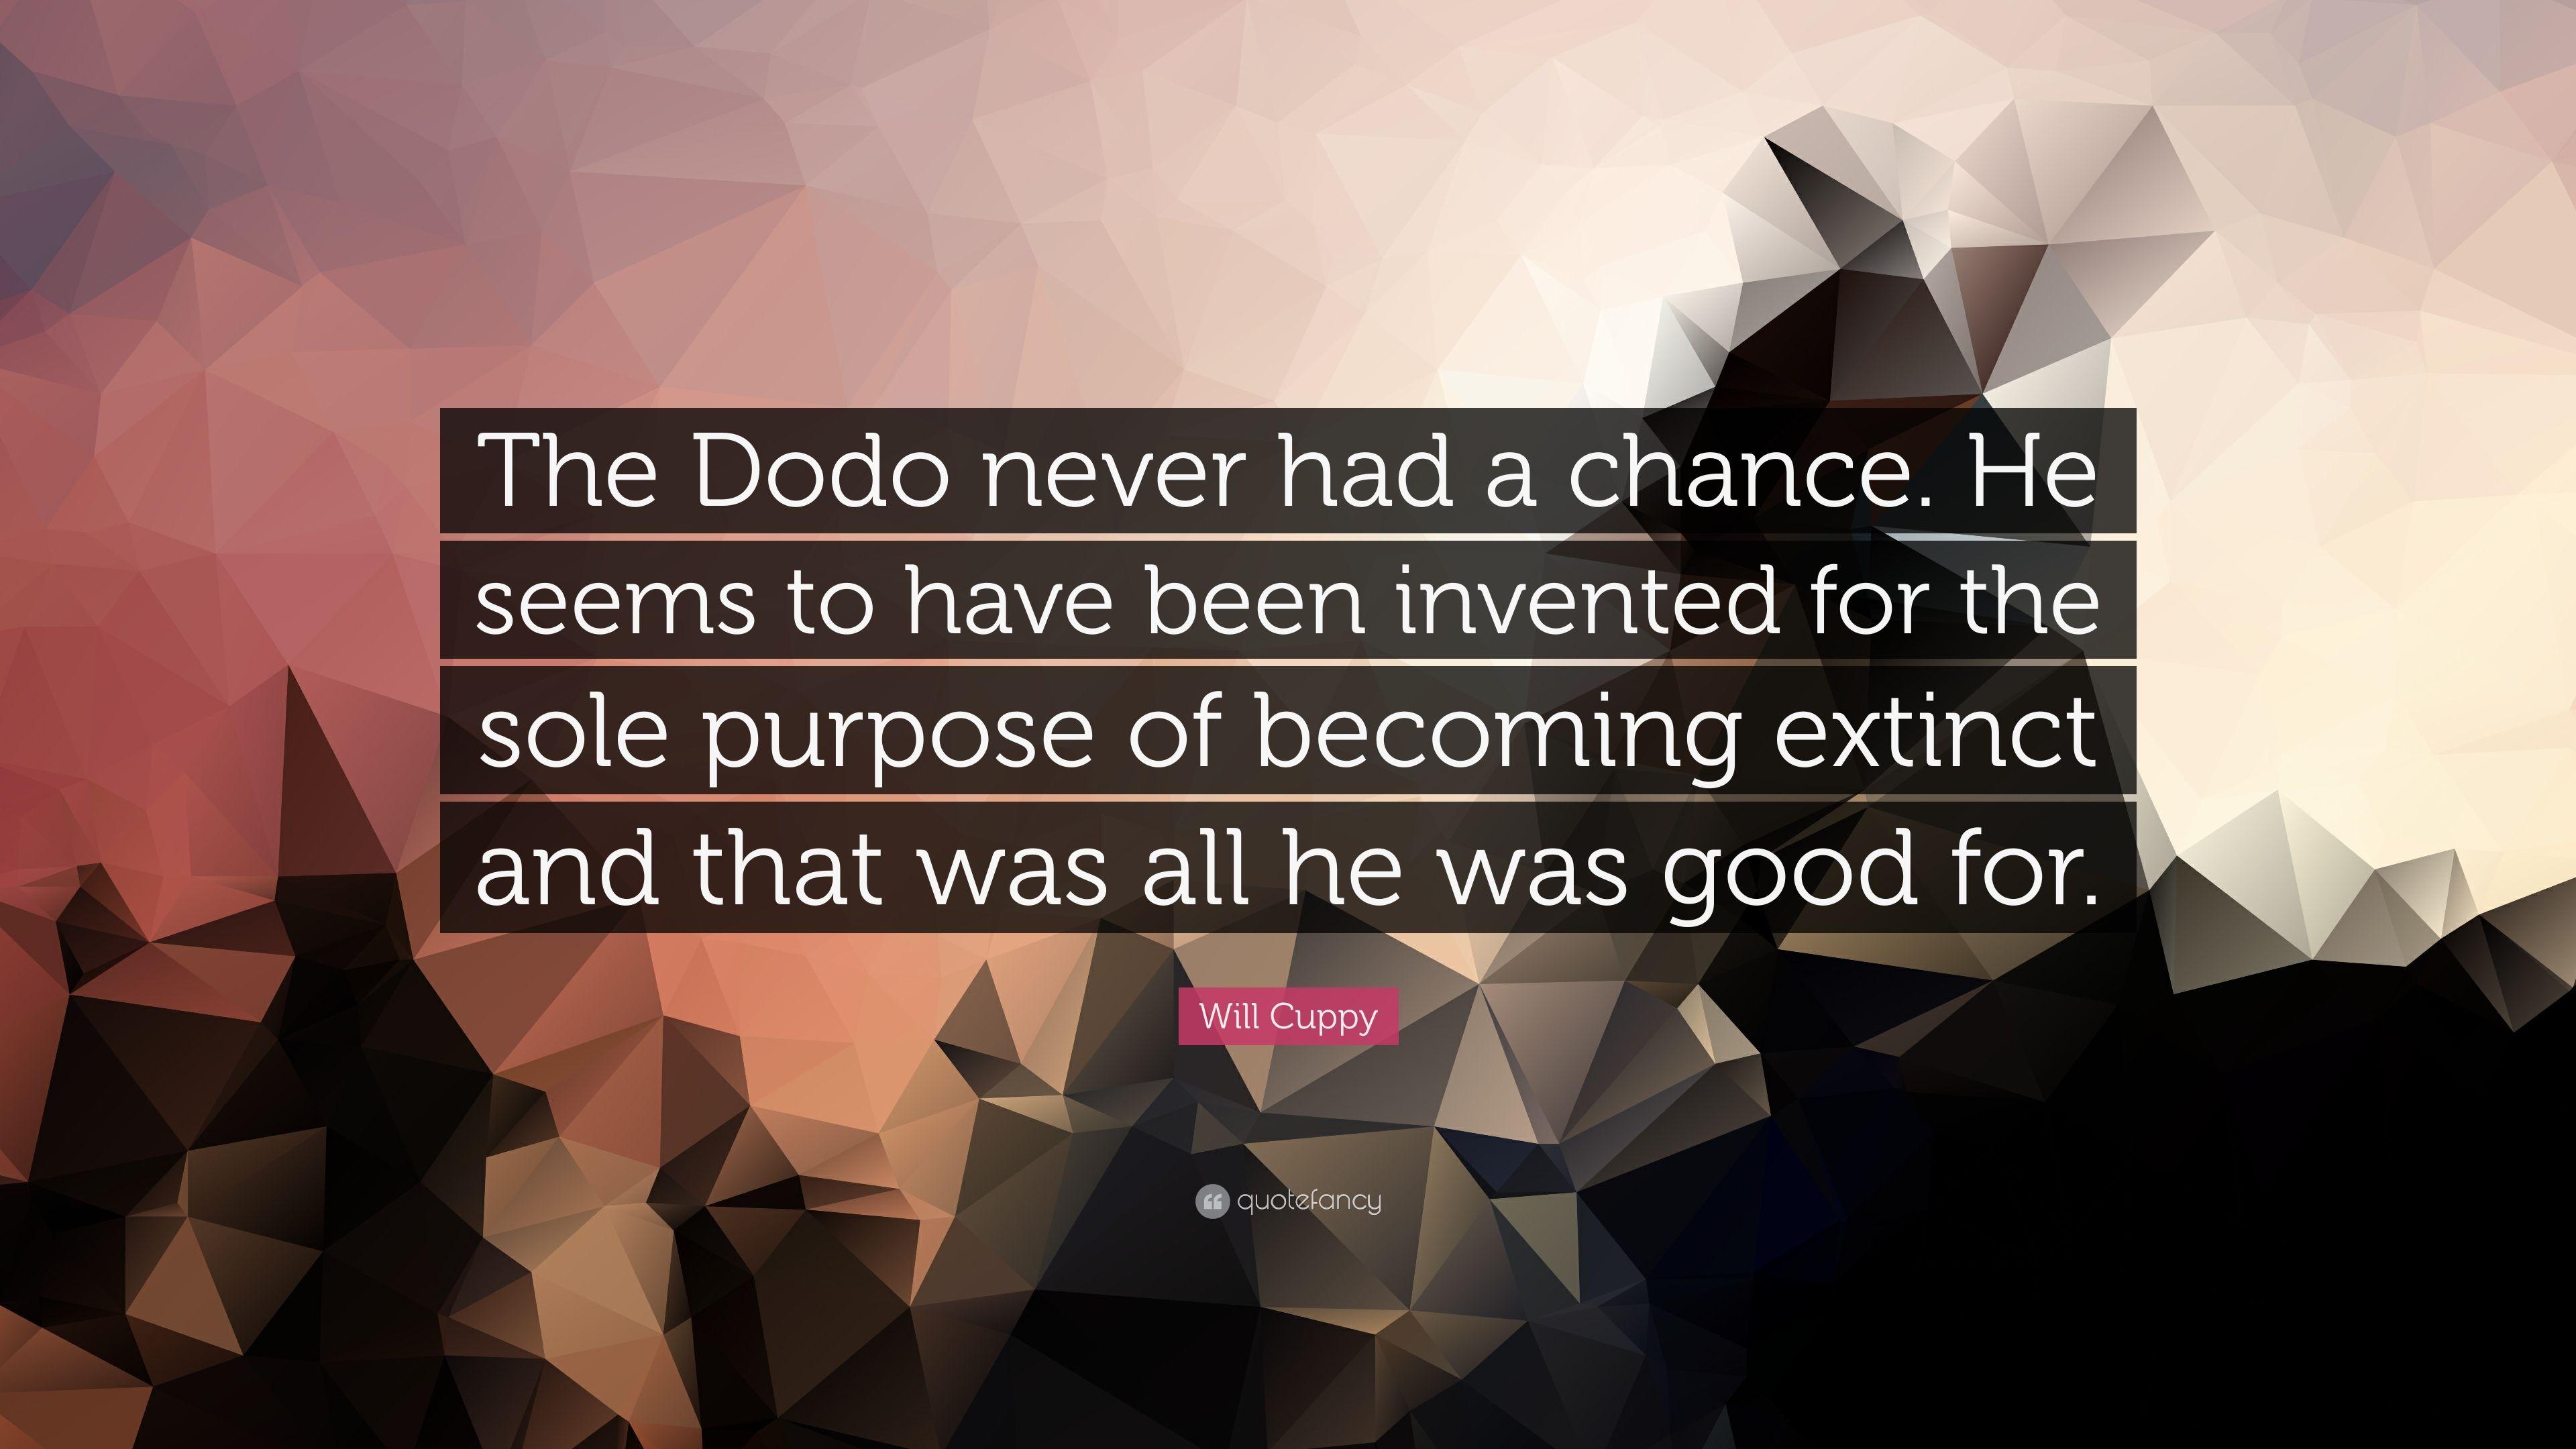 Will Cuppy Quote: “The Dodo never had a chance. He seems to have